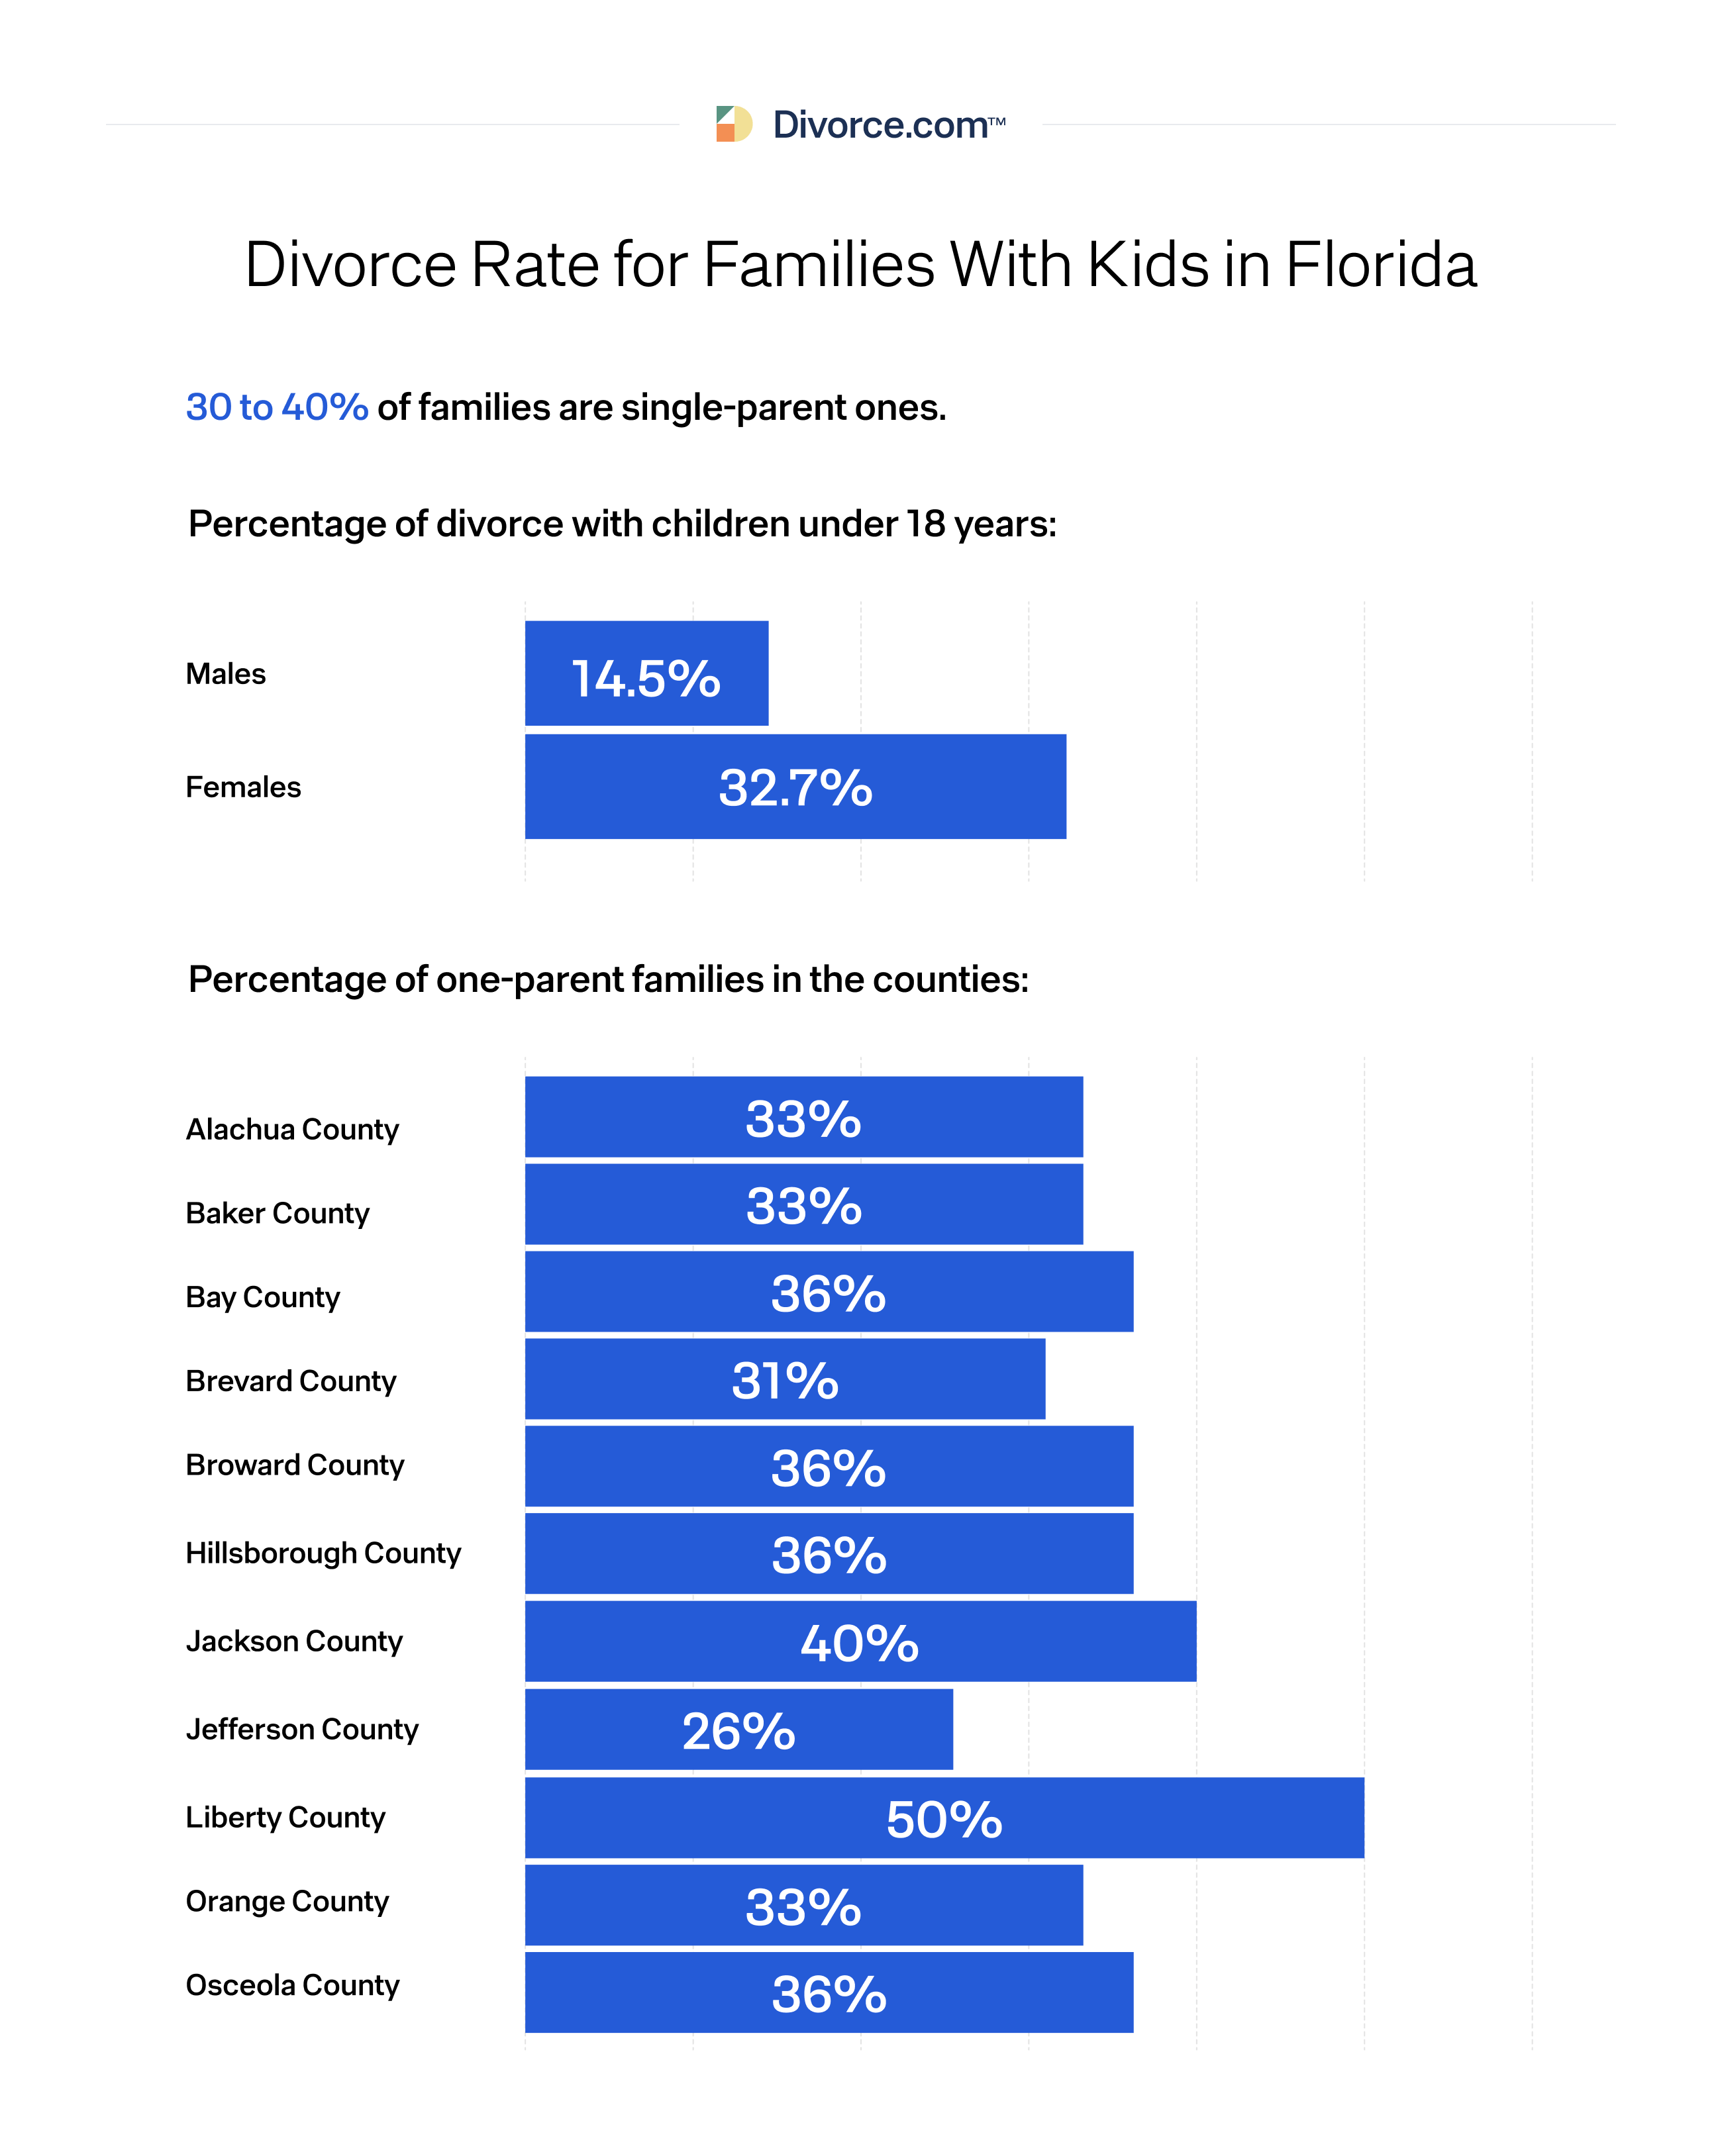 Divorce Rate for Families With Kids in Florida